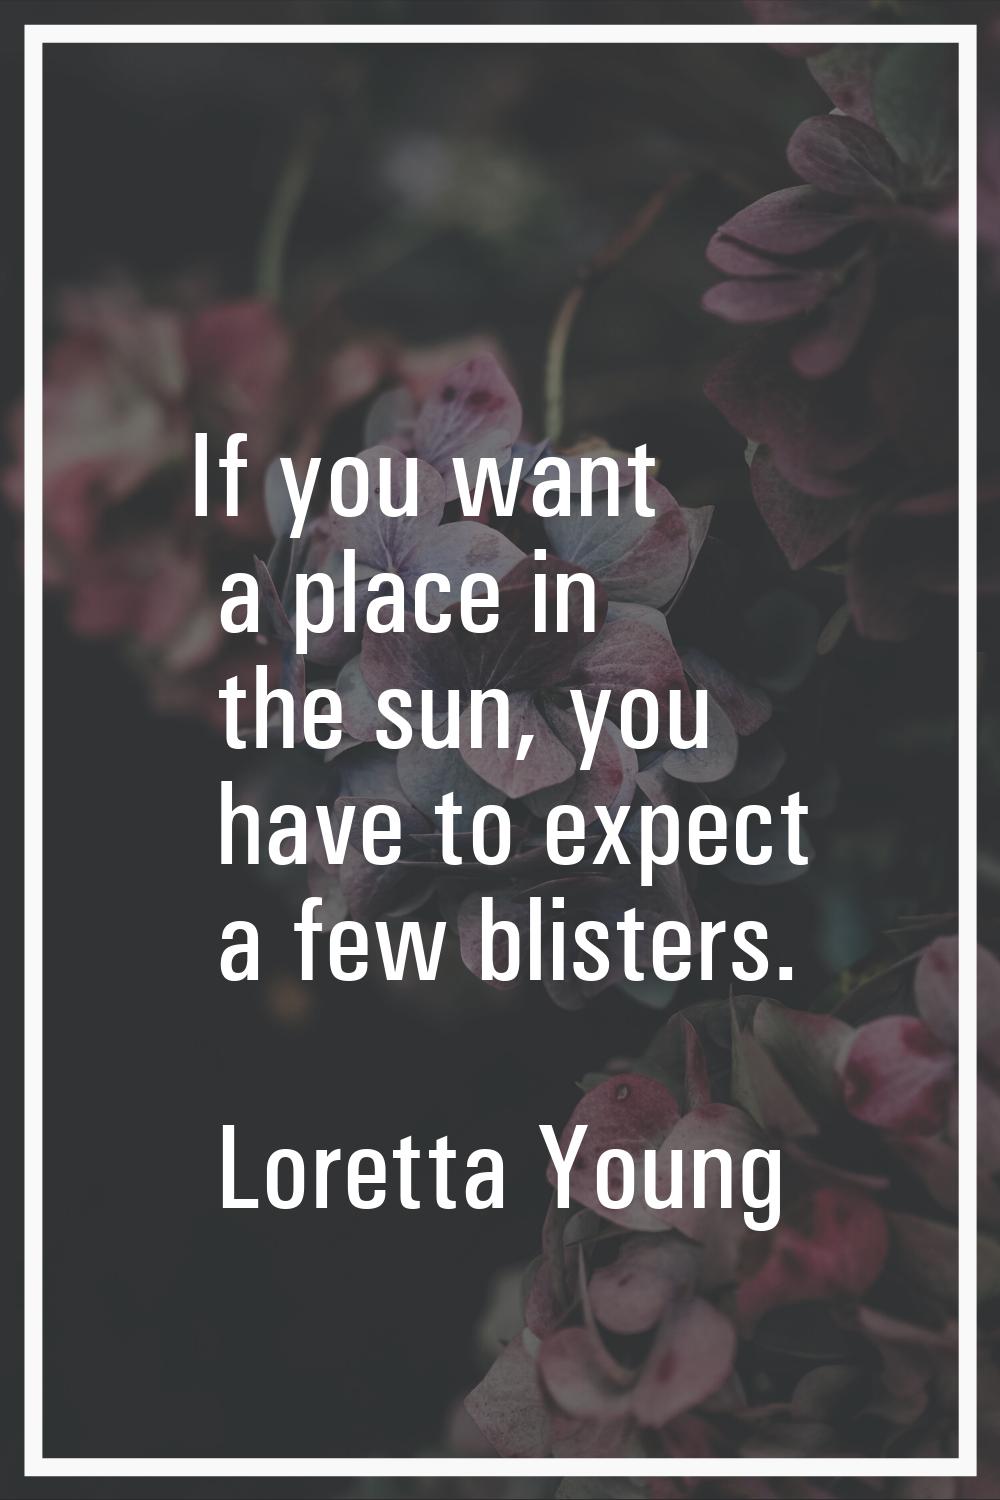 If you want a place in the sun, you have to expect a few blisters.